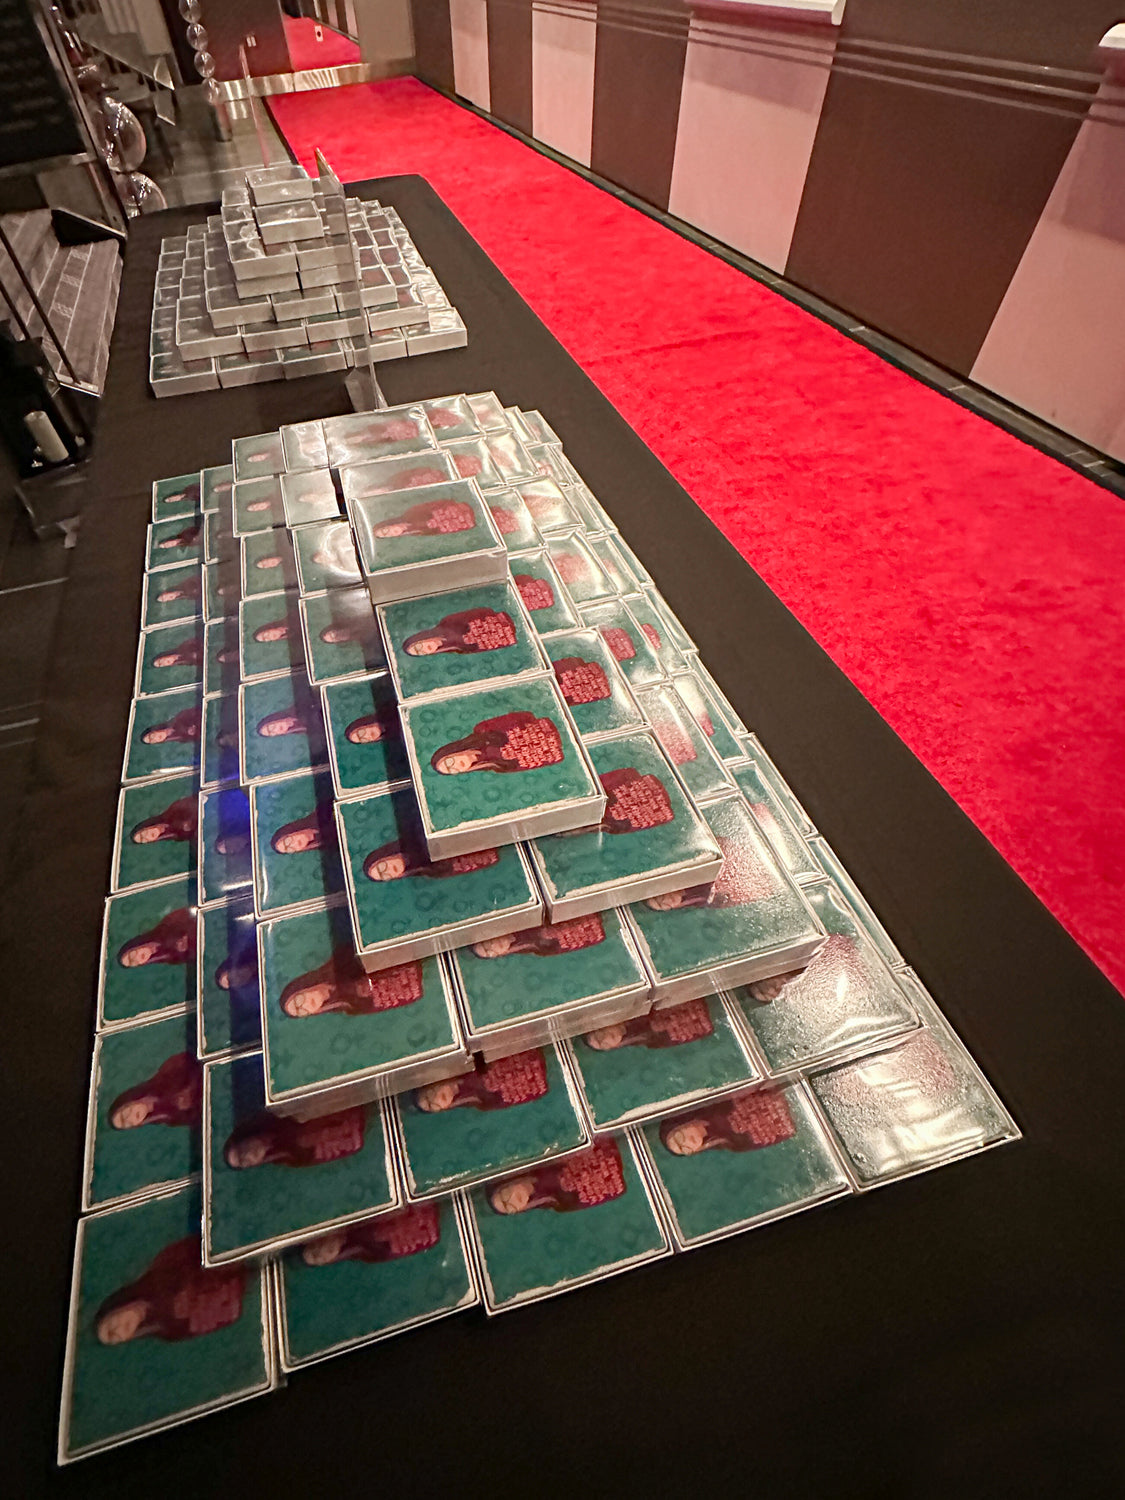 long black table with gloria steinem coasters on it beside a red carpet